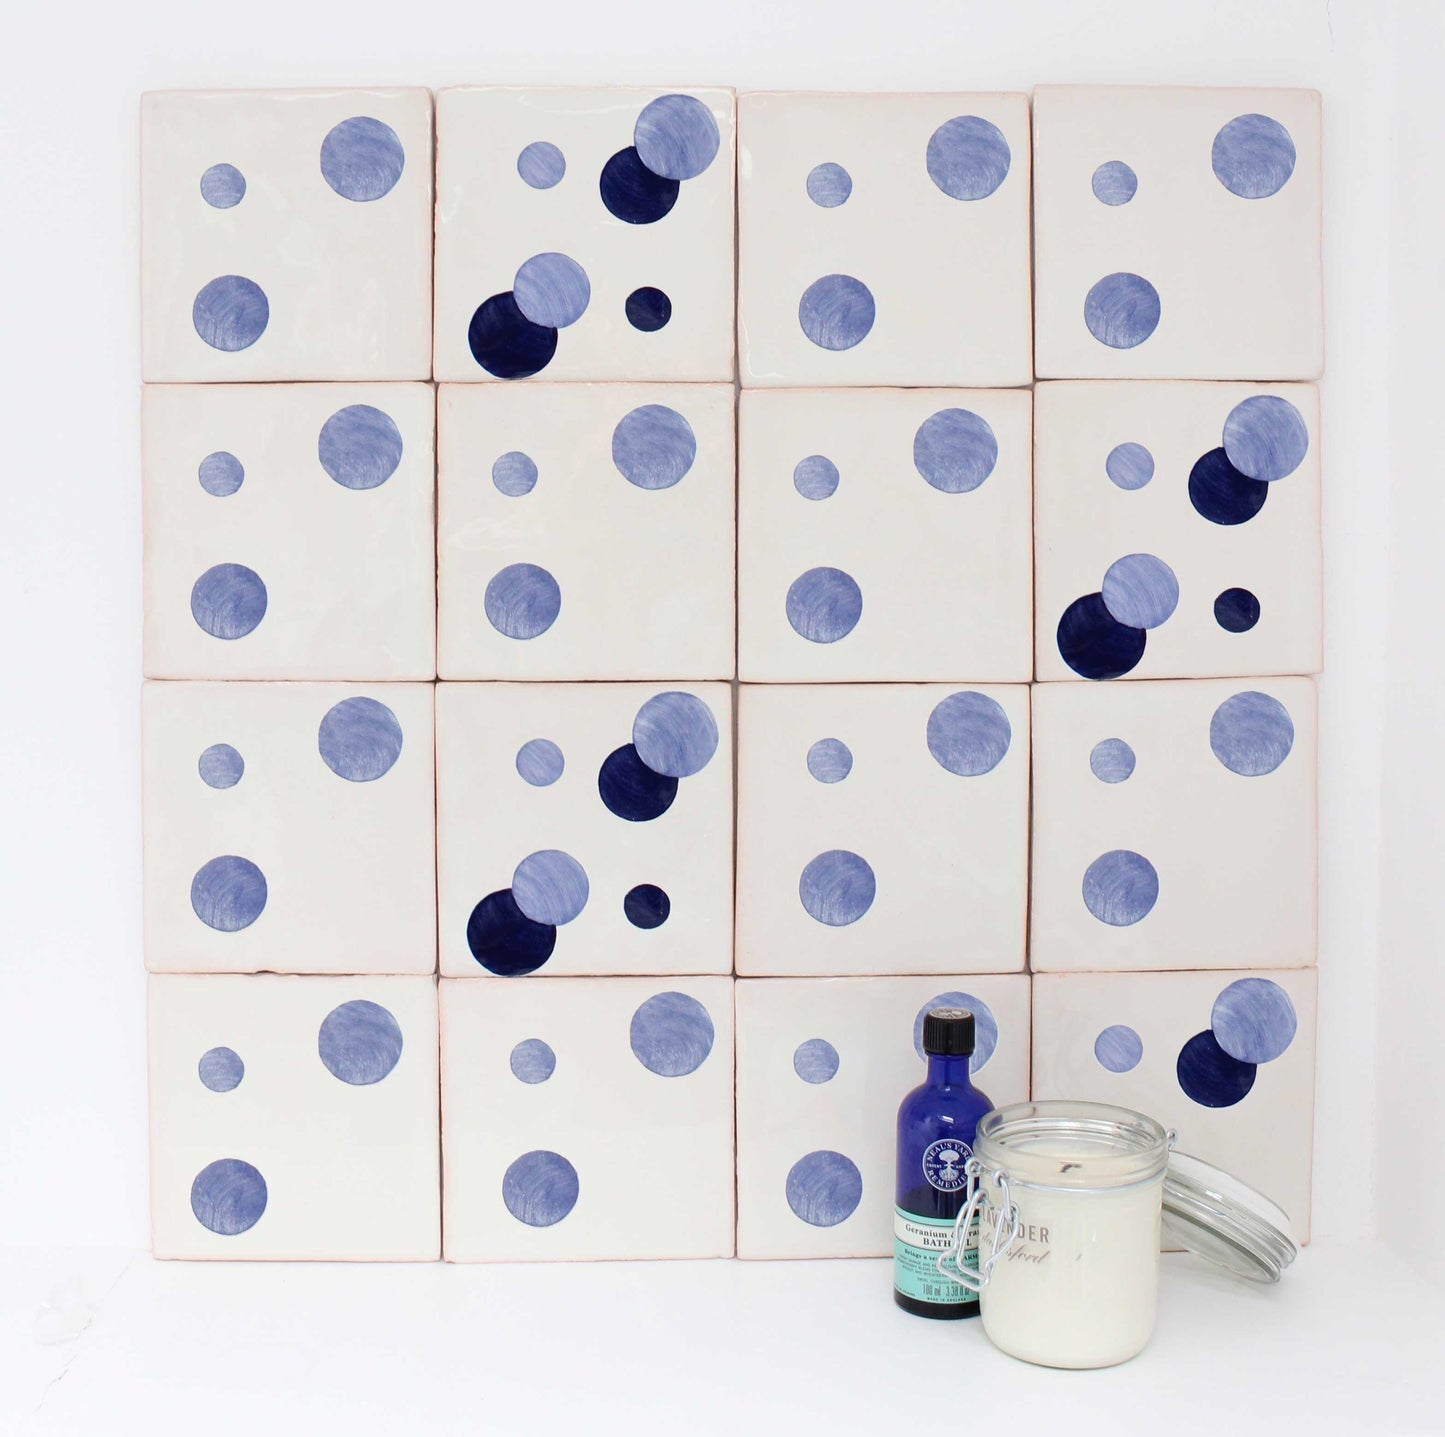 Hand painted Domino pattern tiles